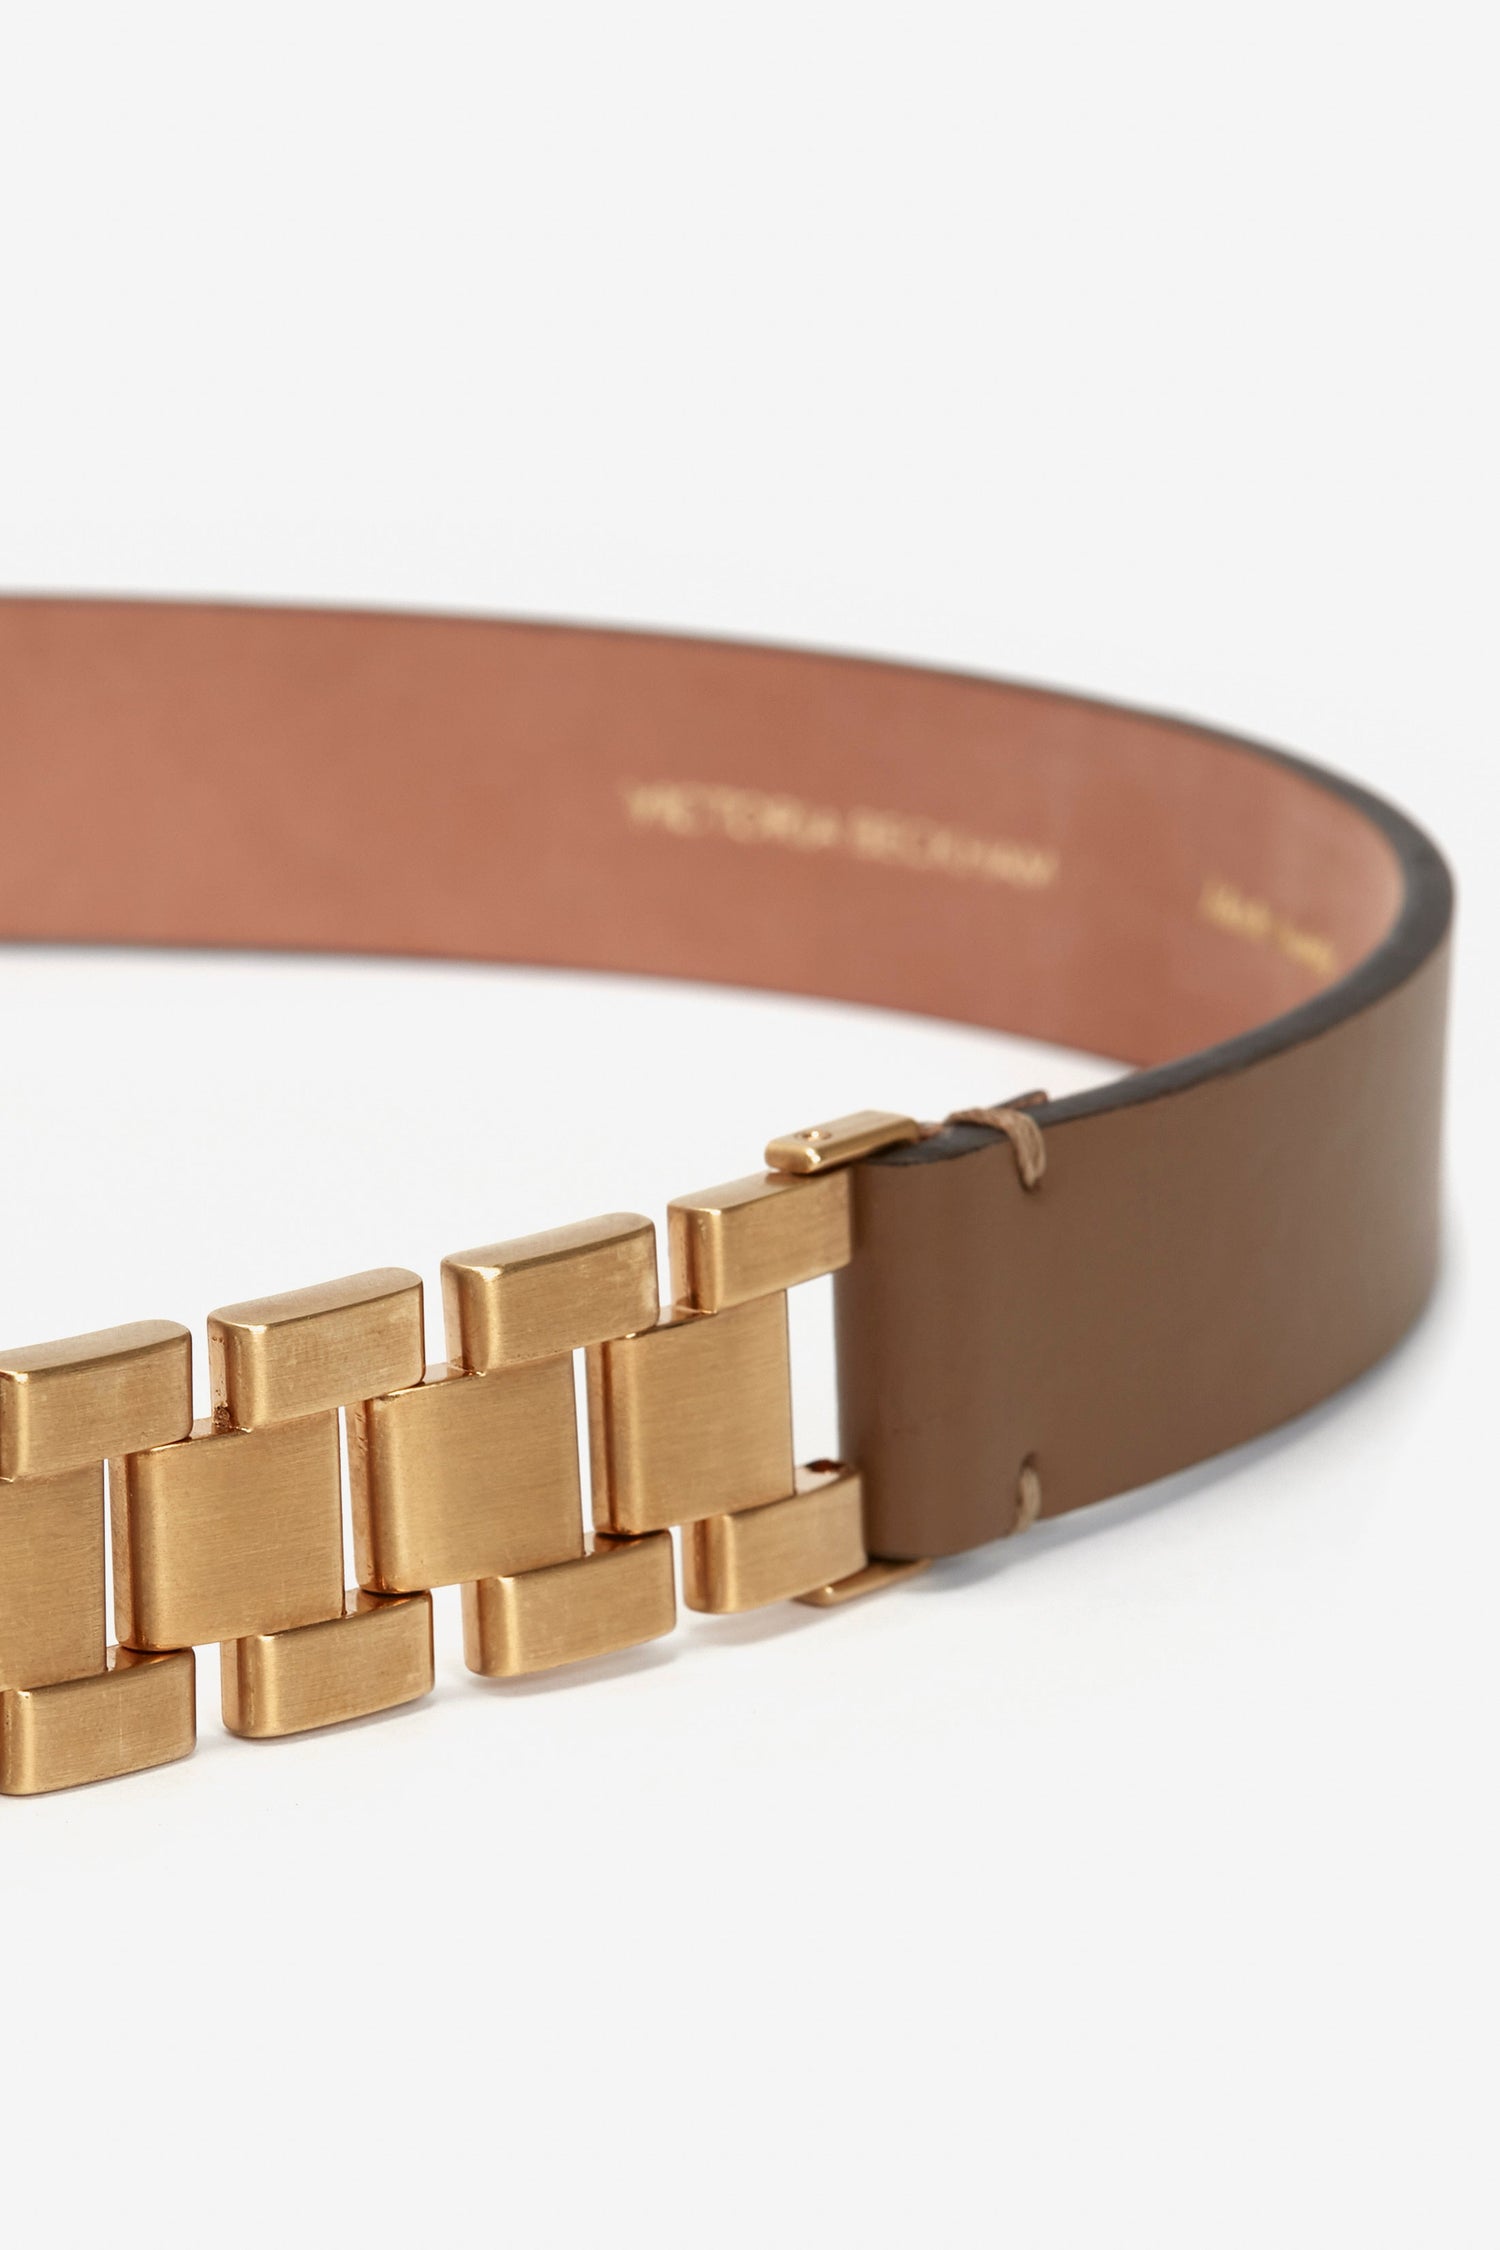 Close-up of a Victoria Beckham Watch Strap Detail Belt in Khaki-Brown with a golden metallic buckle, showing detailed texture and calf-leather finish inside.